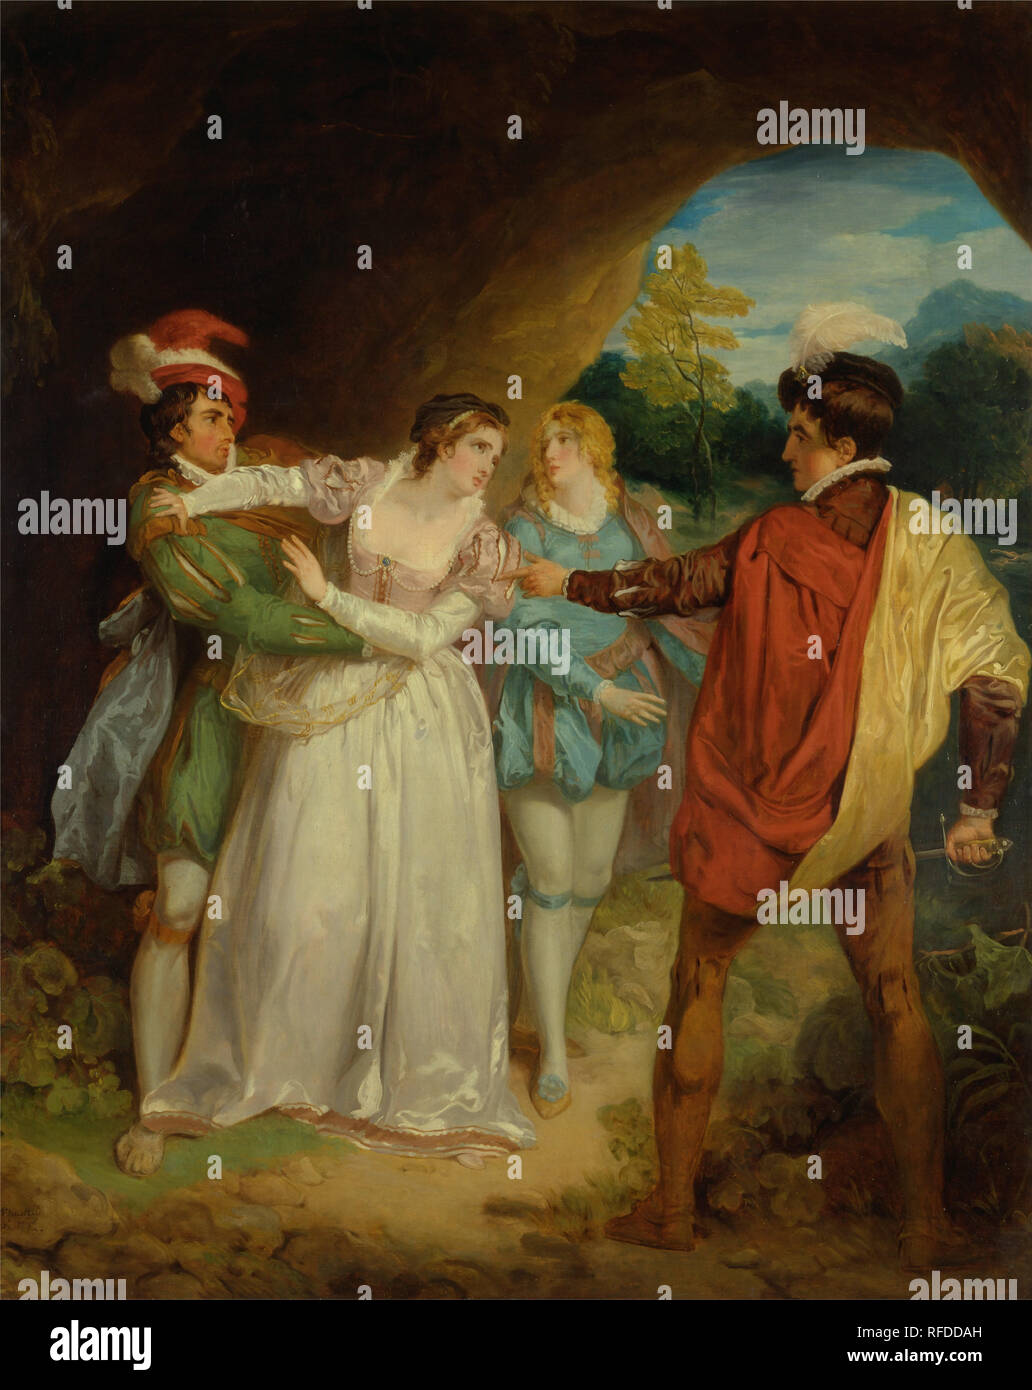 Valentine rescuing Silvia from Proteus, from Shakespeare's 'The Two Gentlemen of Verona,' Act V, Scene 4, the Outlaws' Cave. Date/Period: 1792. Painting. Oil on canvas. Height: 1,664 mm (65.51 in); Width: 1,334 mm (52.51 in). Author: Francis Wheatley. Stock Photo